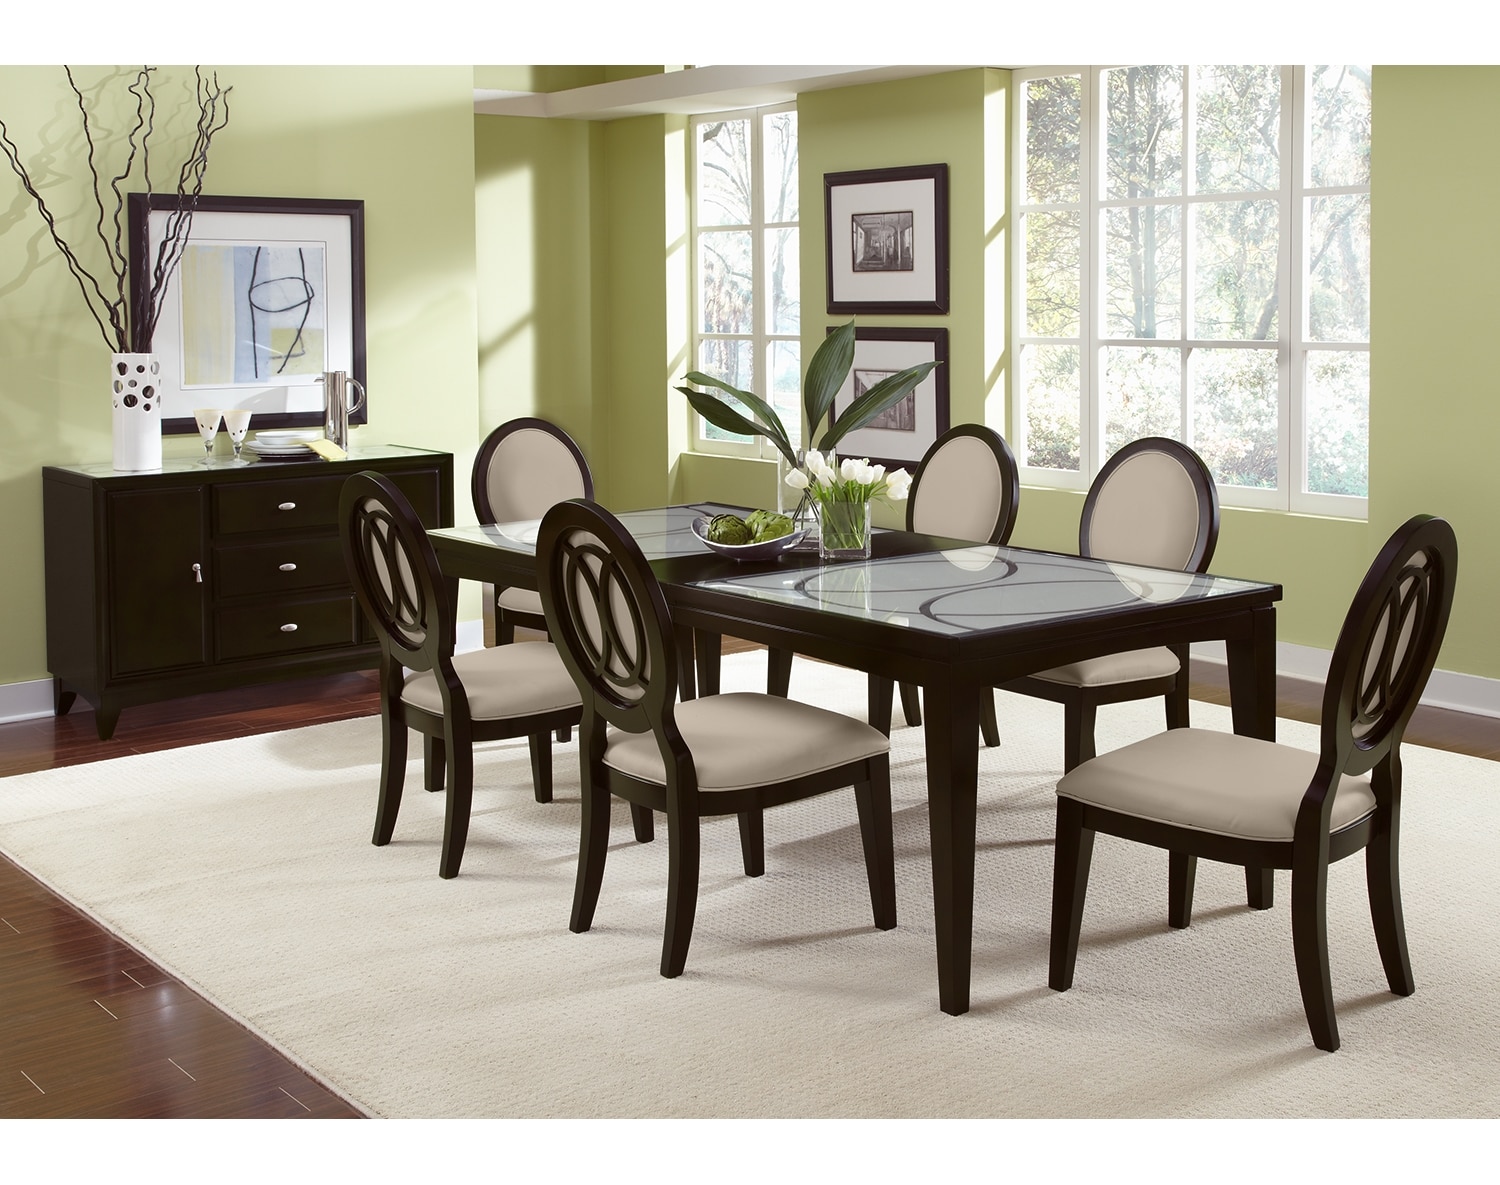 Shop Dining Room Collections Value City Furniture in Kitchen Sets Value City Furniture